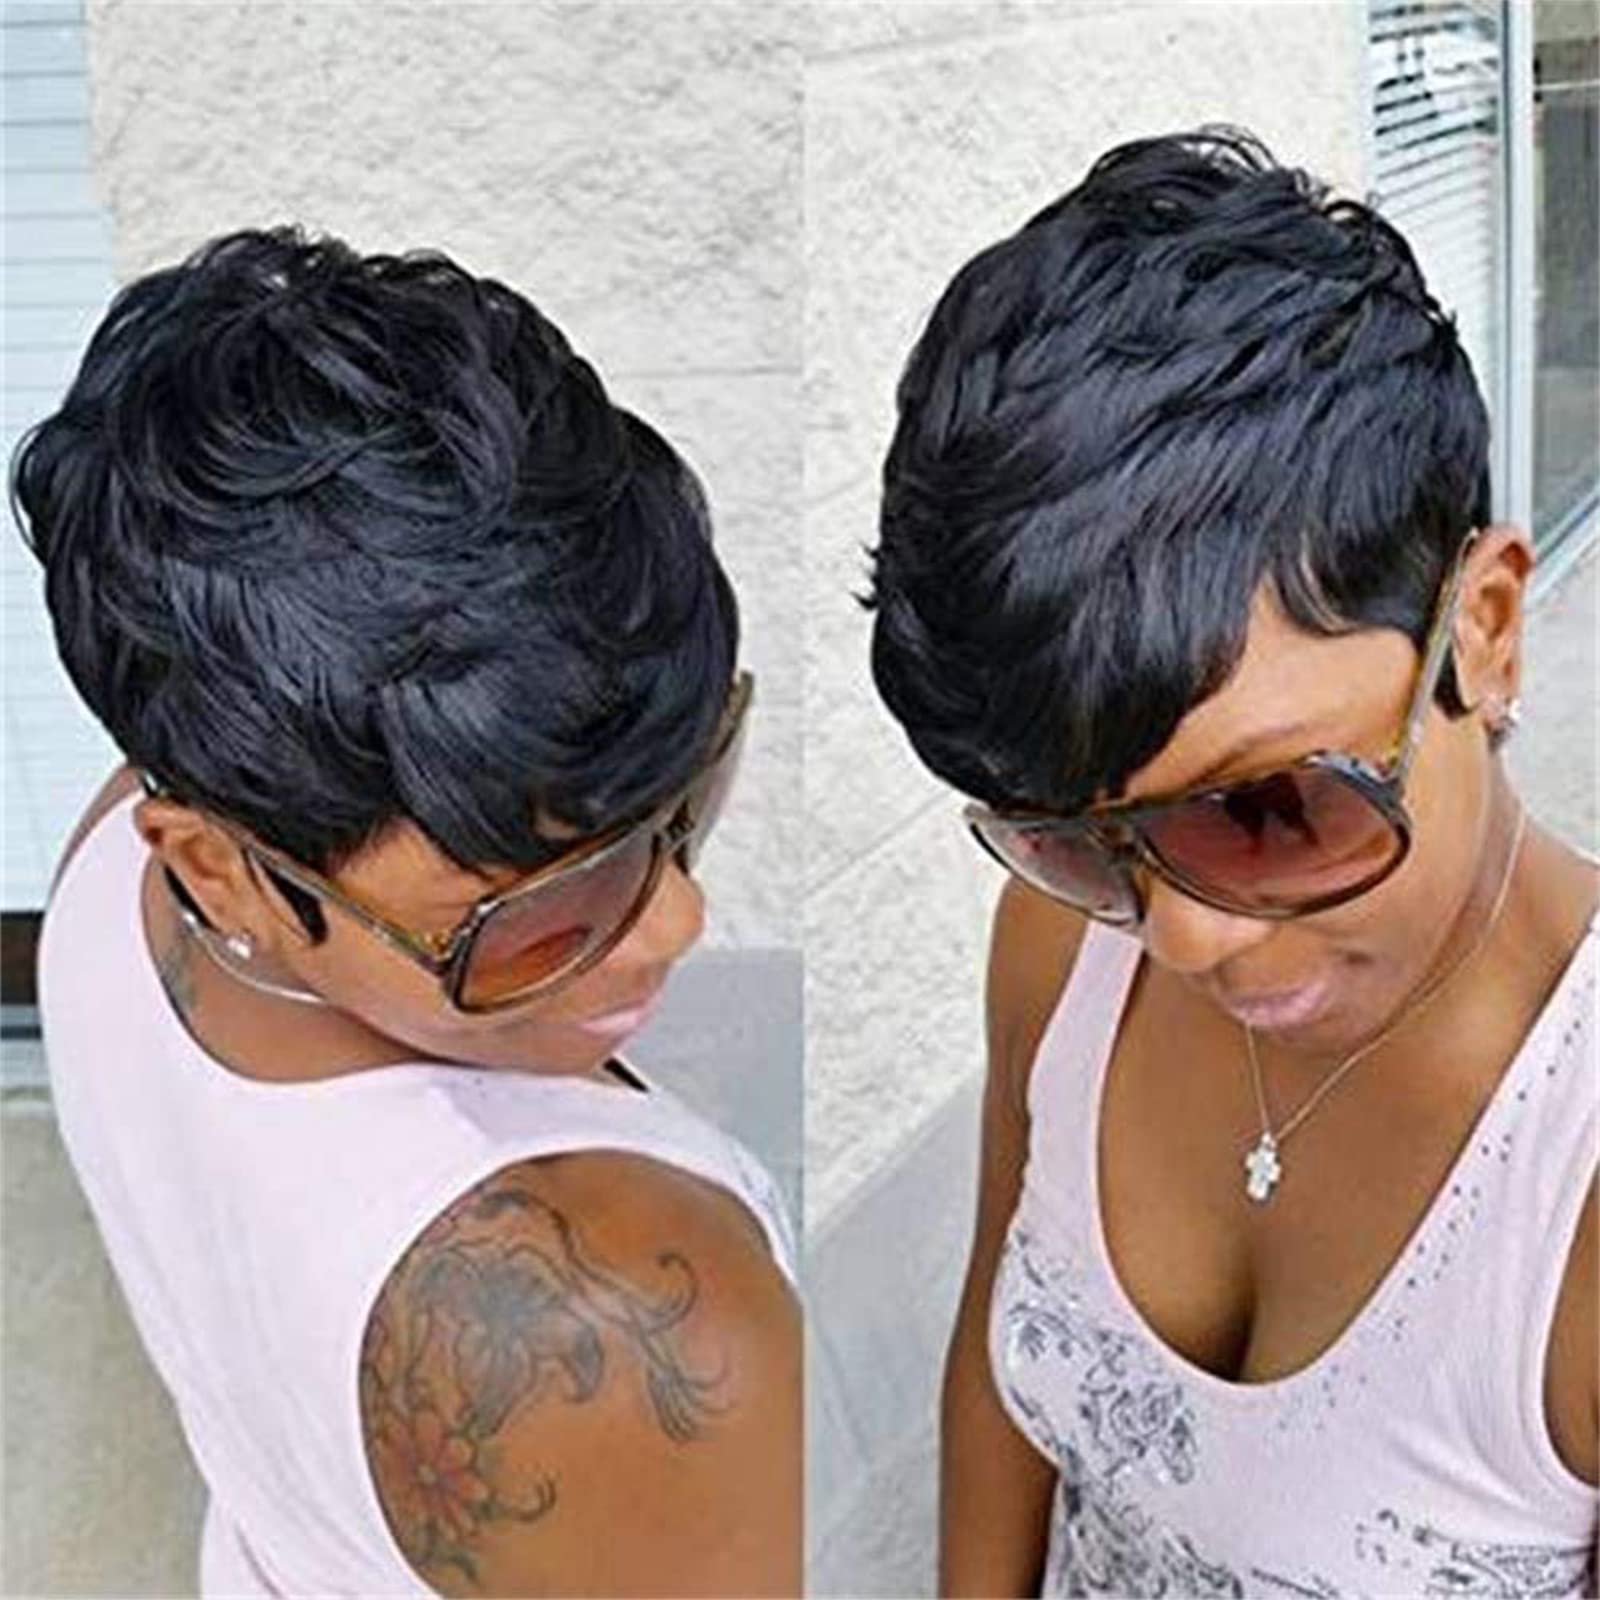 VRZ Short Wigs Human Hair for Black Women Pixie Cut Wig Human Hair with Bangs Layered Wavy Short Human Hair Wigs for Black Women Curly Hair Wigs Color 1B# (MIDDLE WAVY)